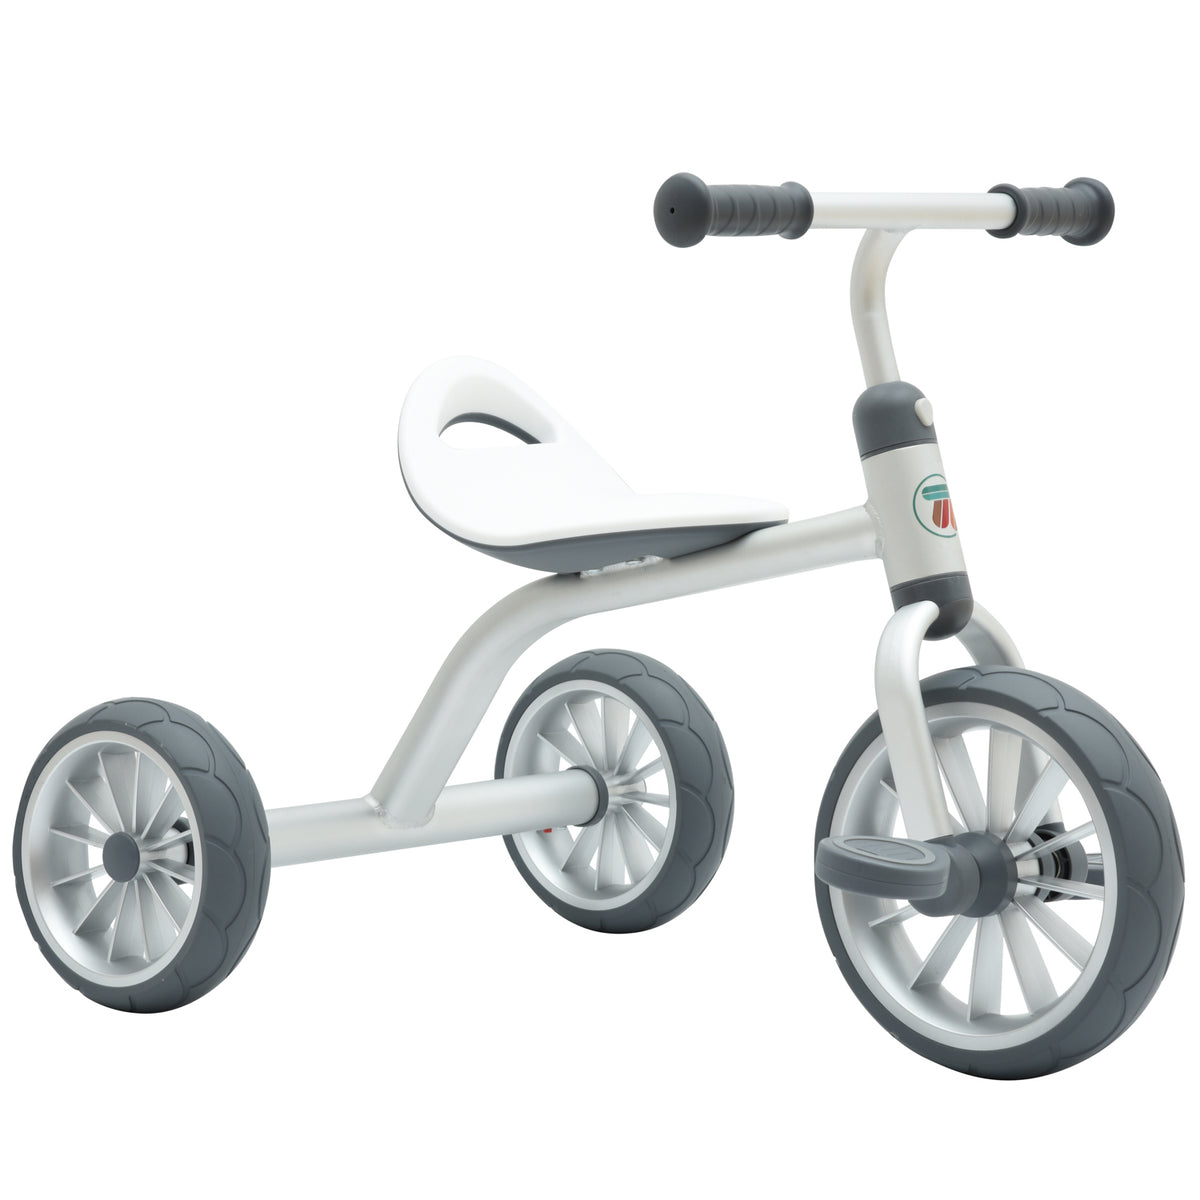 Children's tricycle 2-6 years